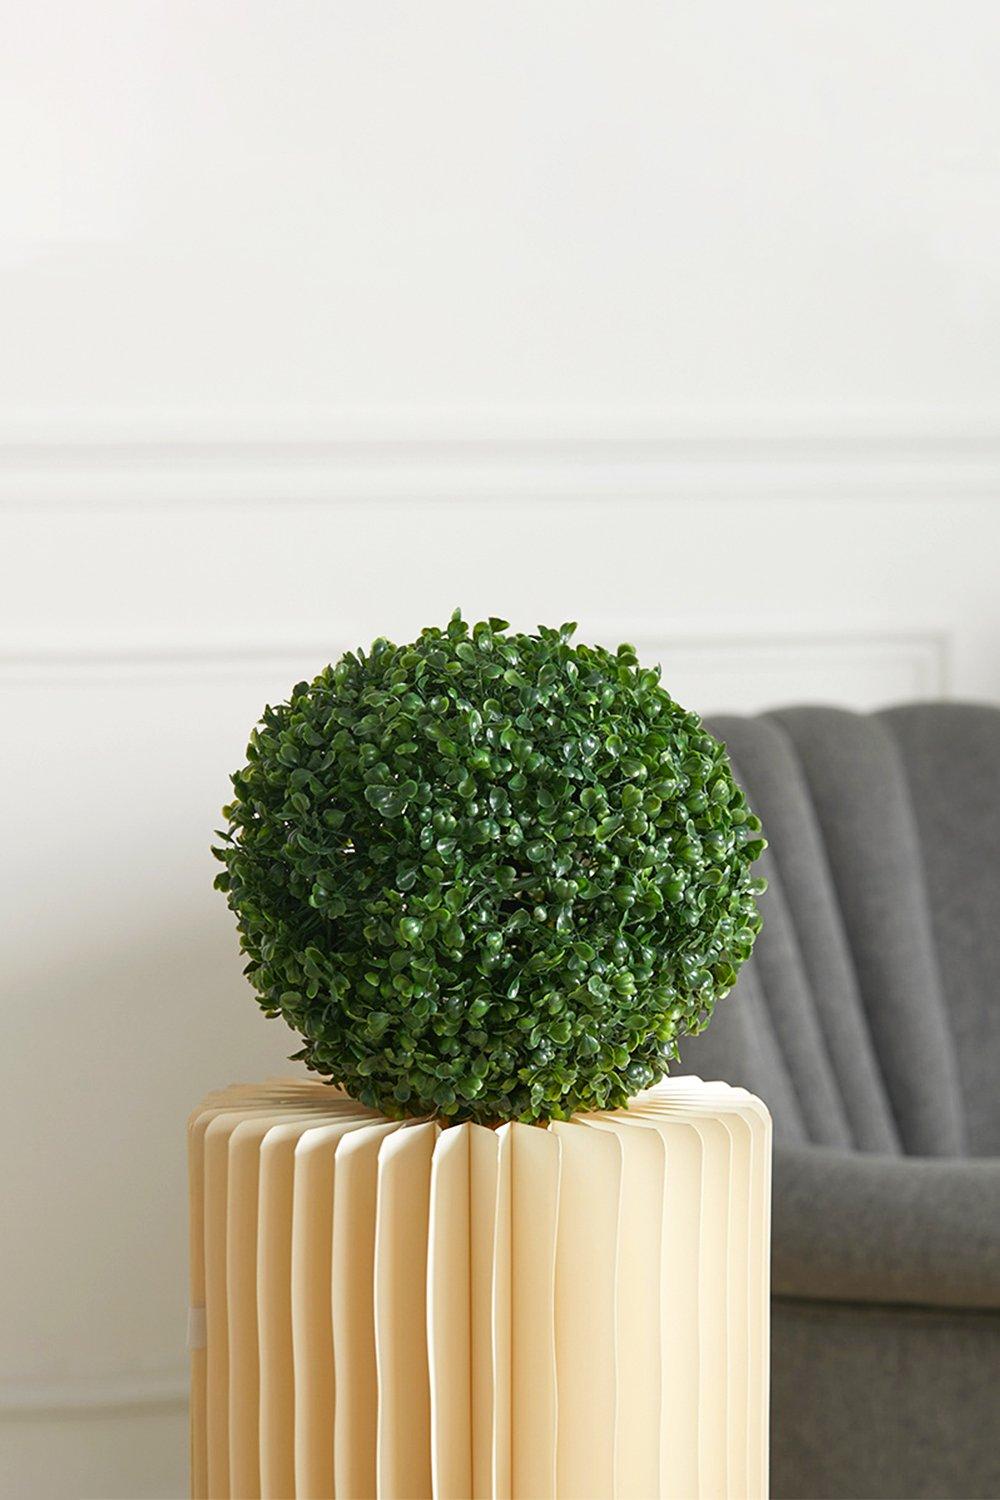 Artificial Flowers | Boxwood Ball 28cm Artificial Hanging Buxus Topiary ...